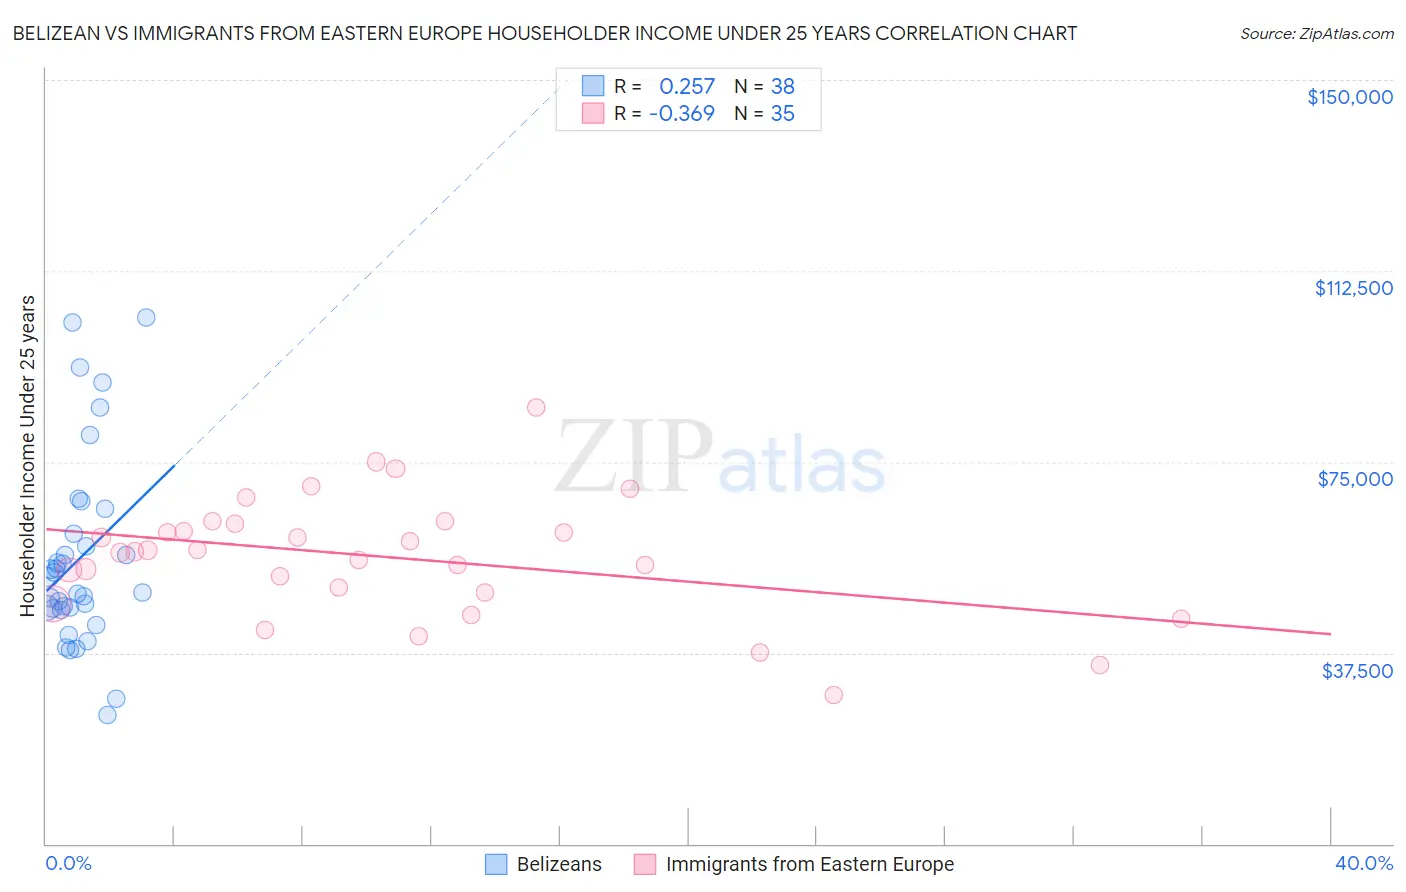 Belizean vs Immigrants from Eastern Europe Householder Income Under 25 years